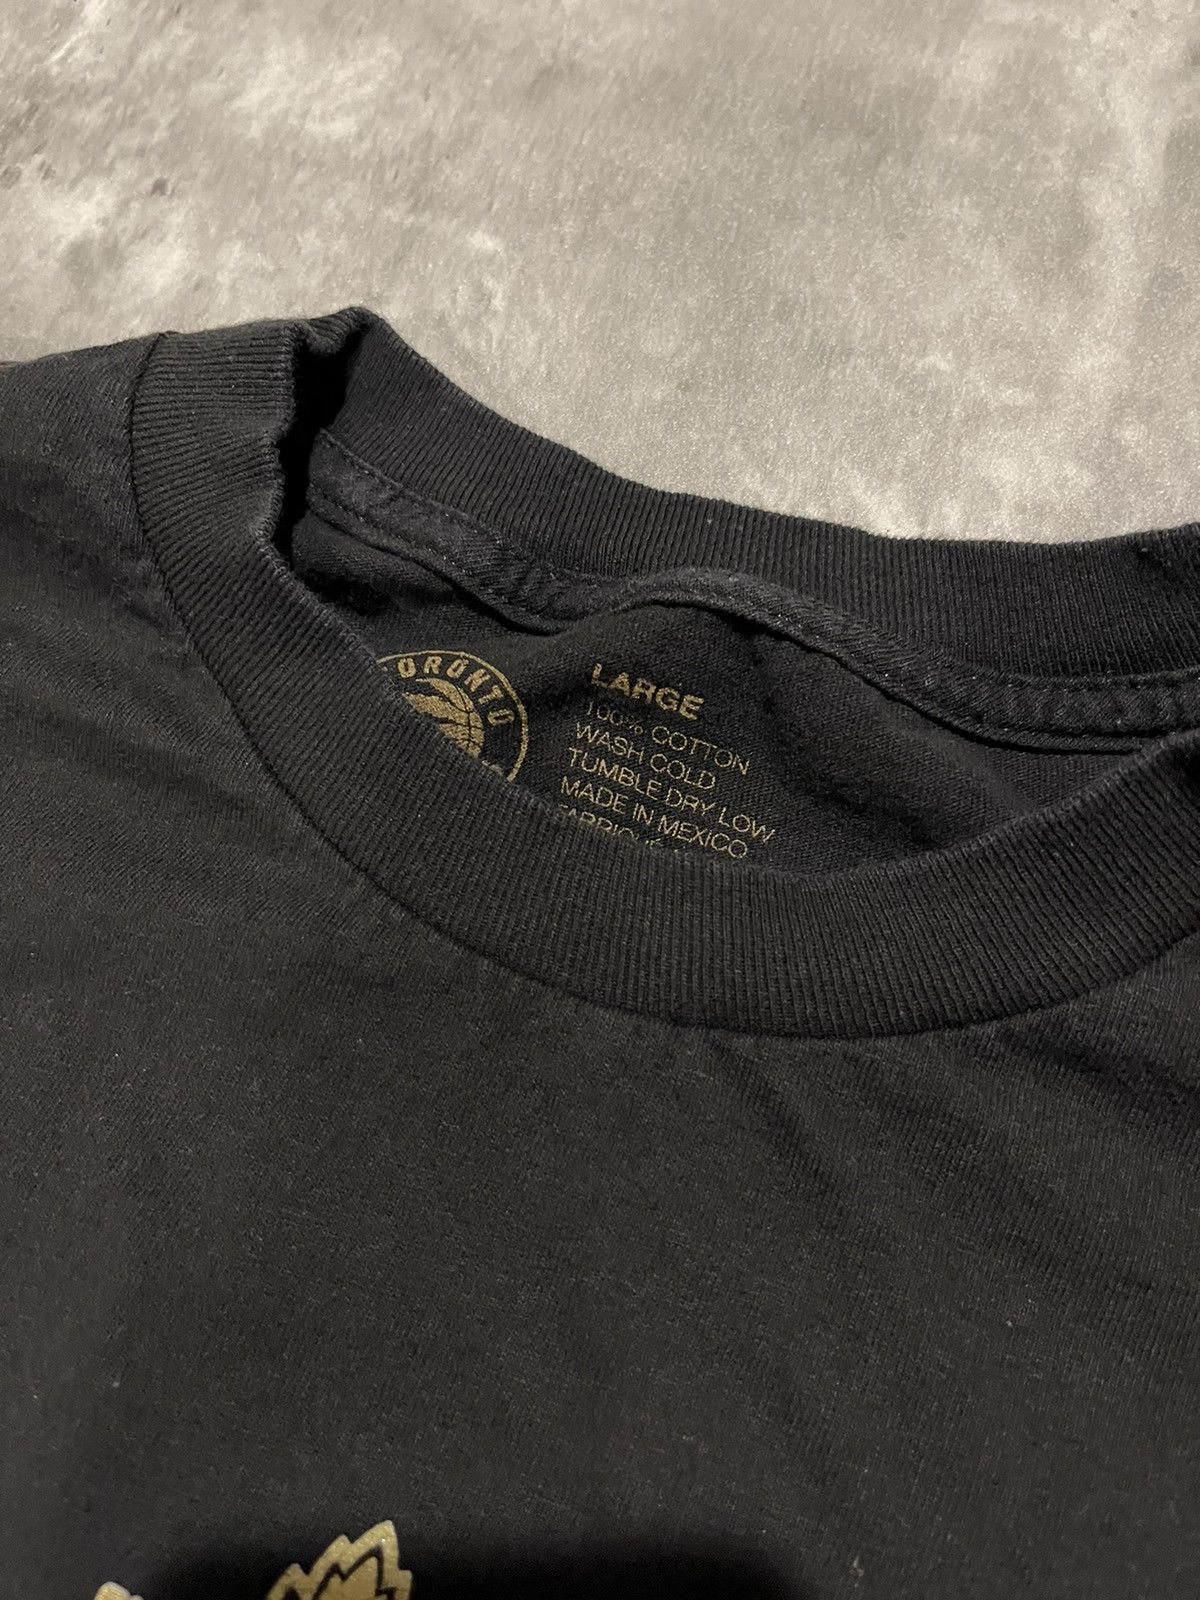 Octobers Very Own OVO x Toronto Raptors Drake Night 2018 Long Sleeve Tee Size US L / EU 52-54 / 3 - 4 Preview